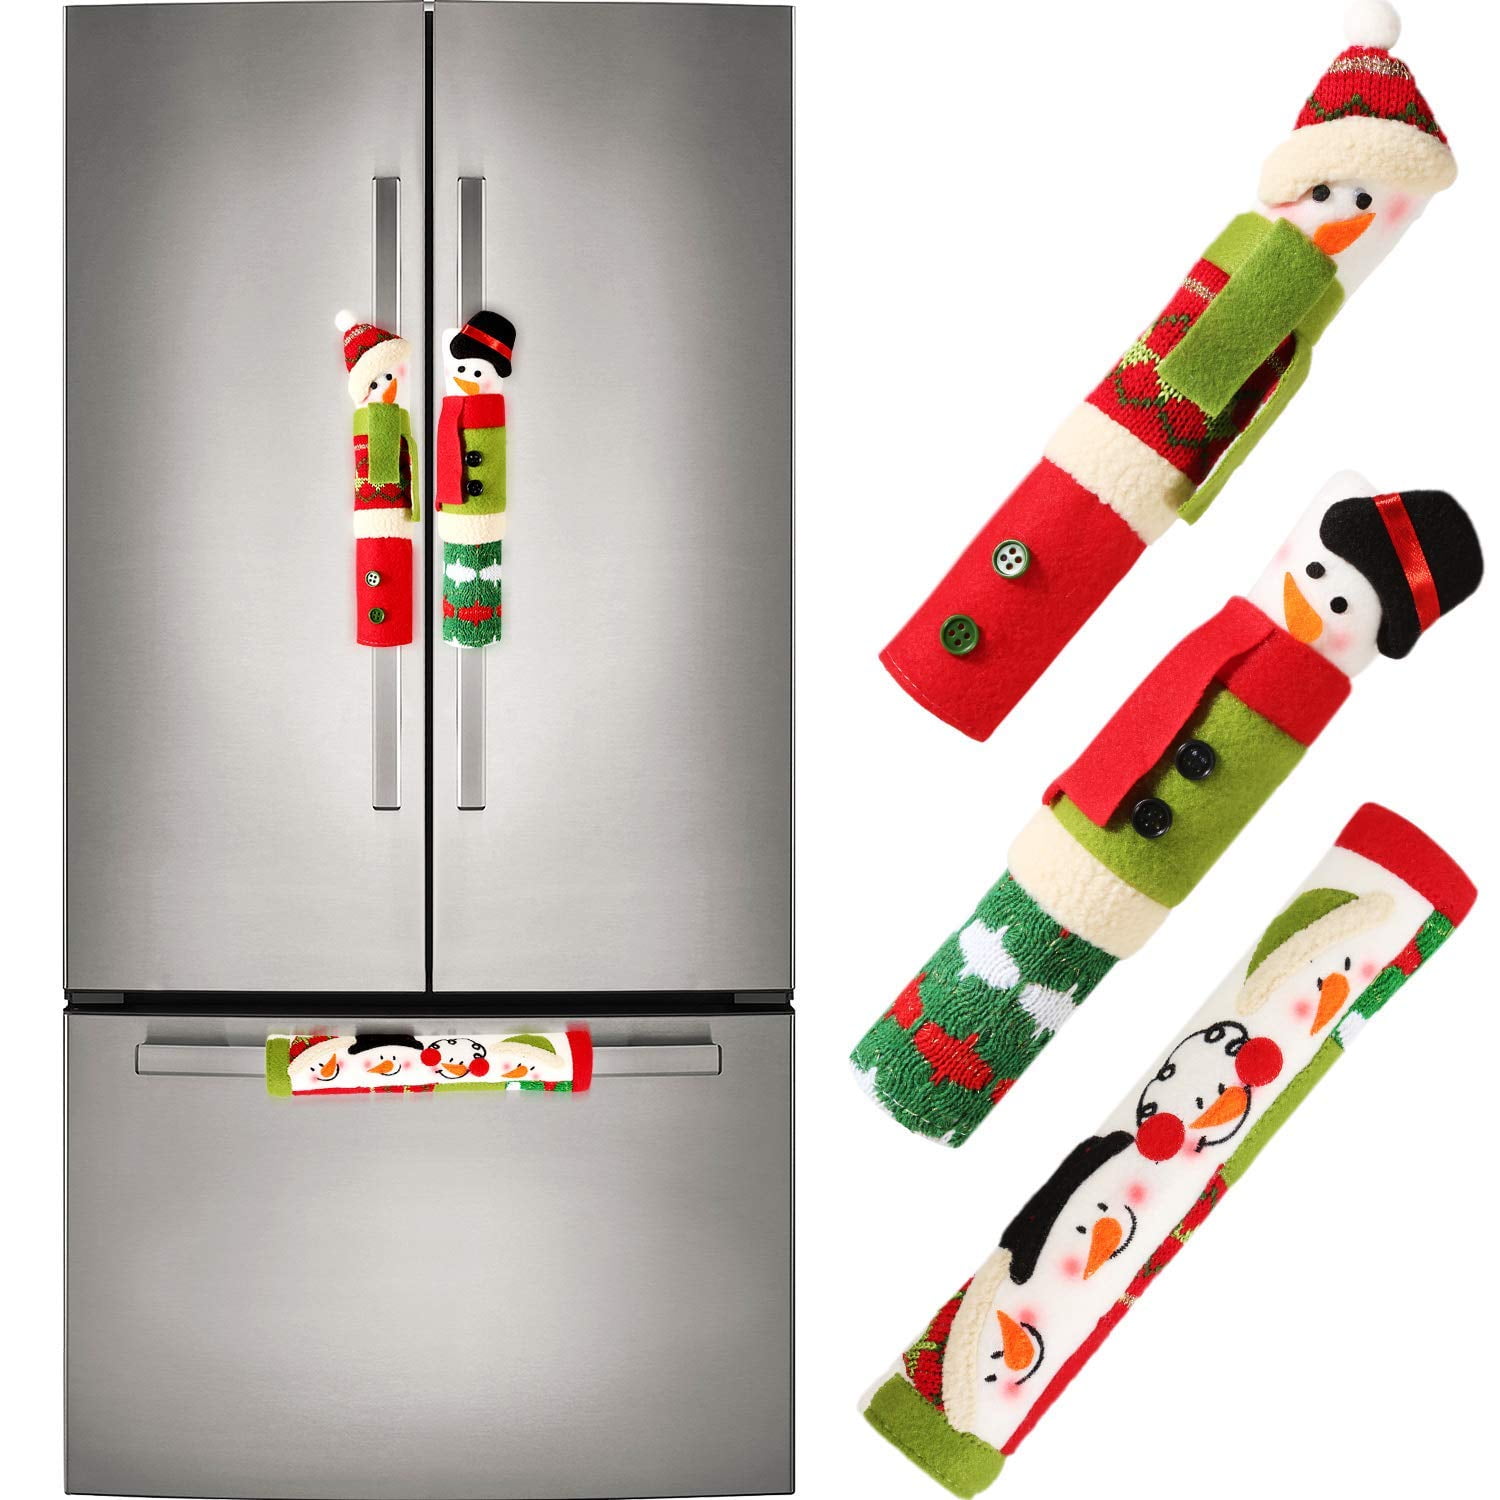 OUGAR8 Adorable Christmas Refrigerator Handle Covers Set of 4pcs Fun Snowman Reindeer Design Cute & Practical Fridge Handle Cover Protective Kitchen Appliance Handle Covers Perfect Idea Cover